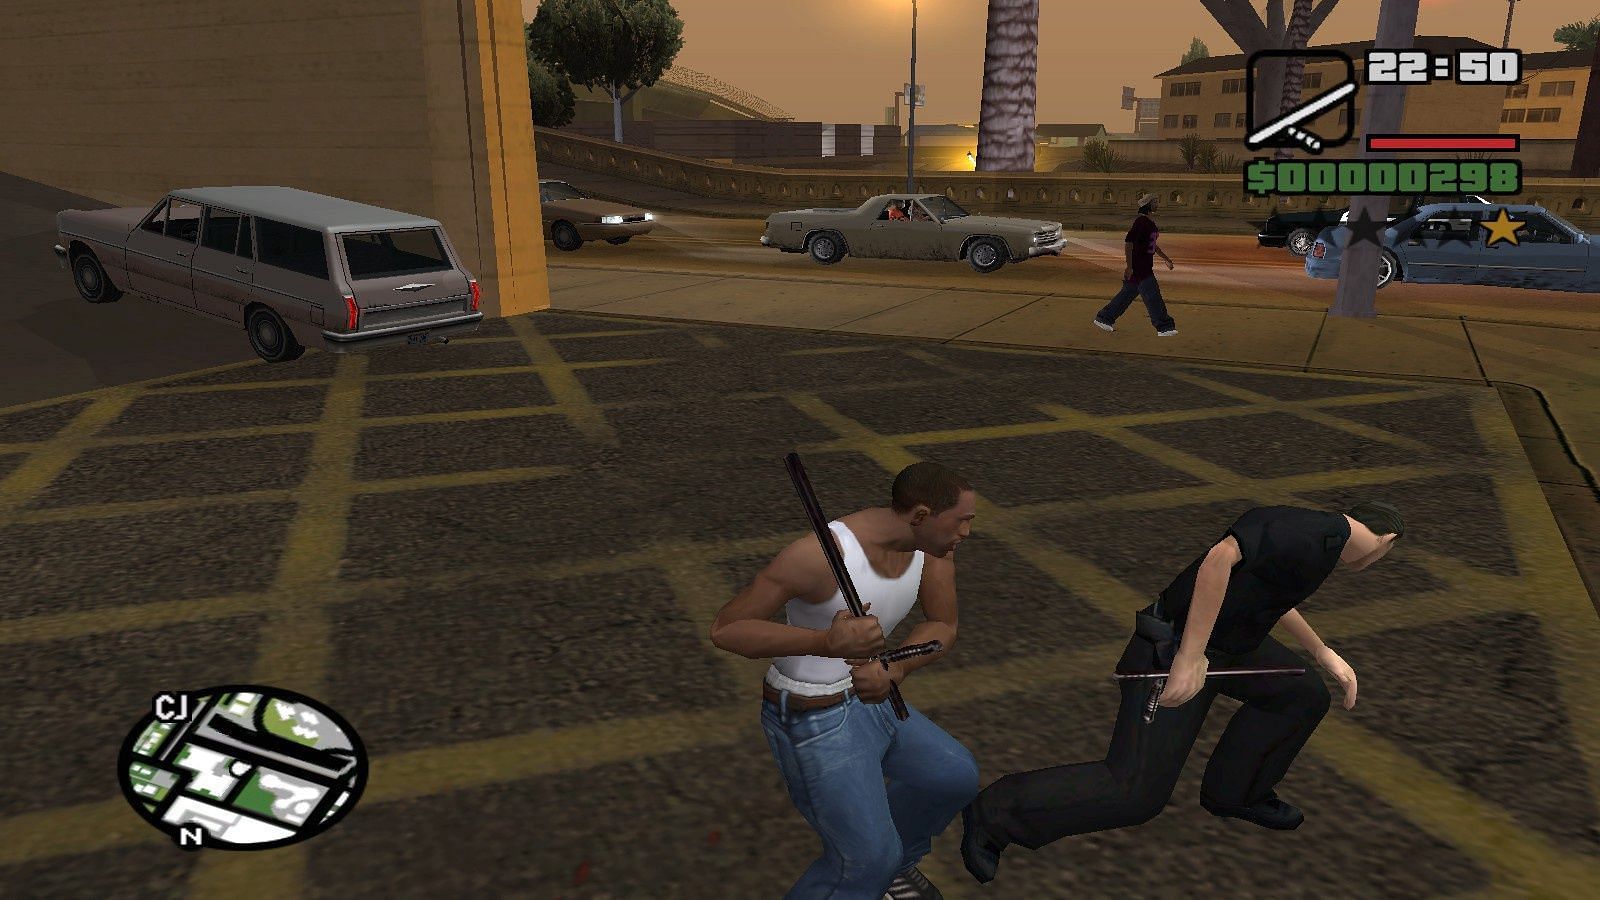 GTA San Andreas players who own the game can still play it in all its glory (Image via Rockstar Games)